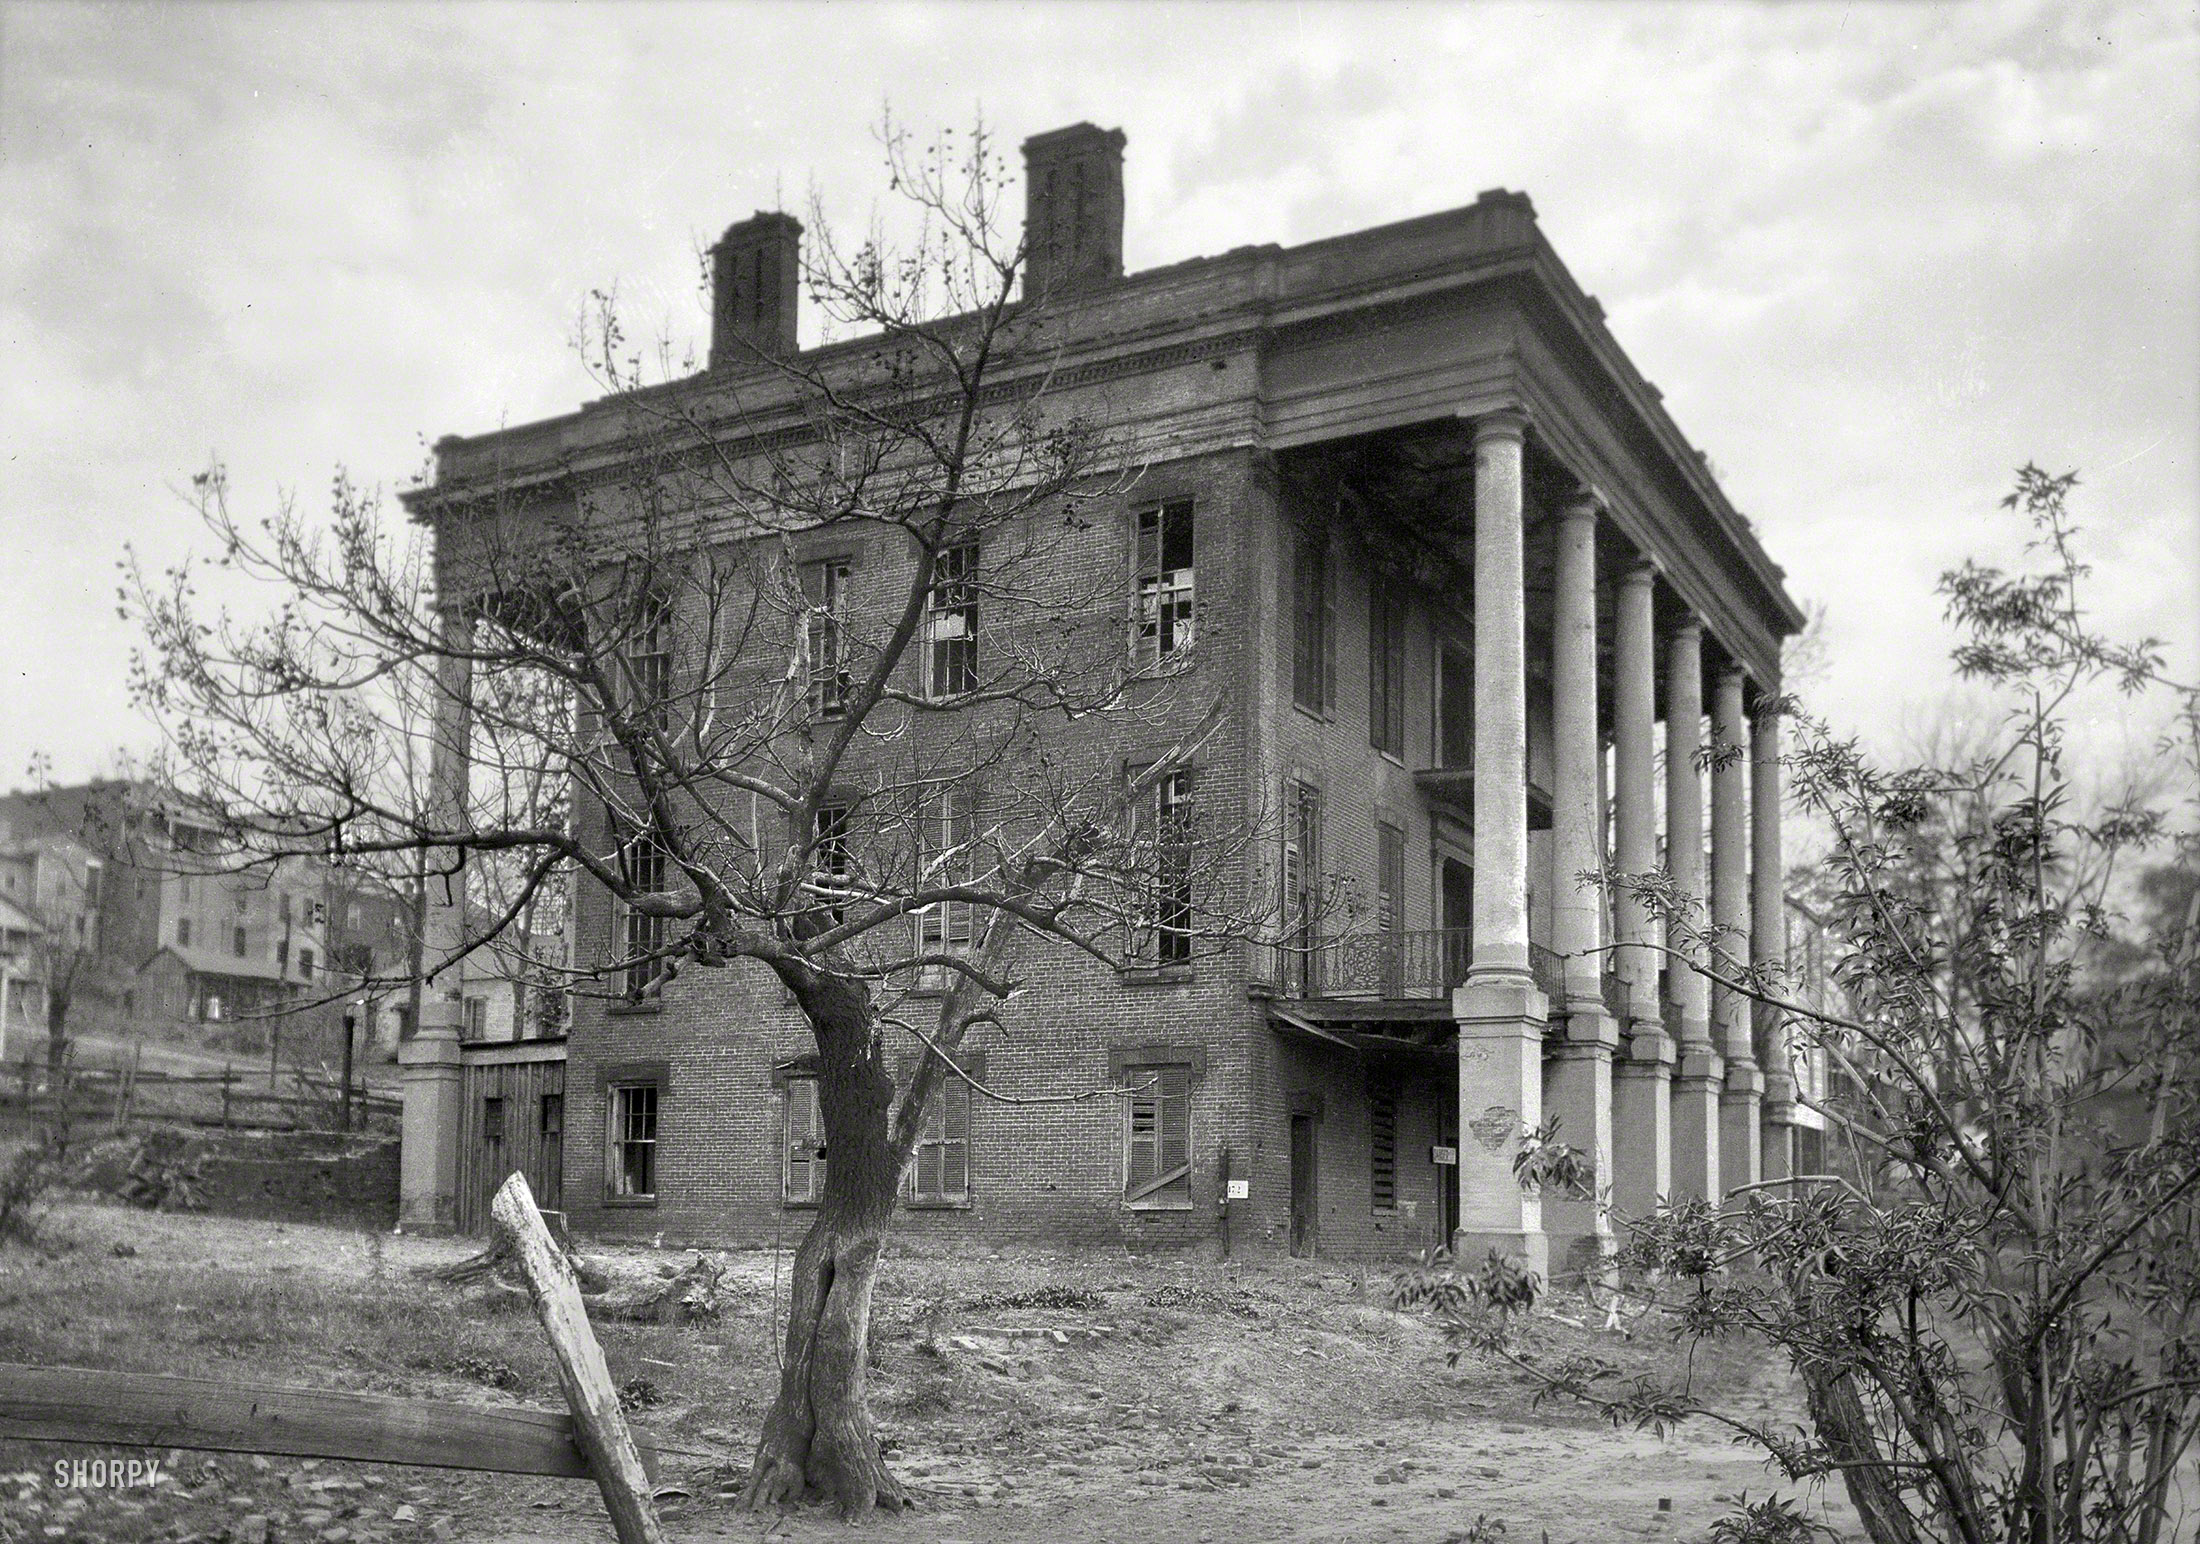 March 29, 1934. Vicksburg, Mississippi. "Shamrock (Porterfield residence), Oak Street, northwest elevation. Structure erected 1851." And demolished in 1936. Photo by Ralph Clynne, Historic American Buildings Survey. View full size.